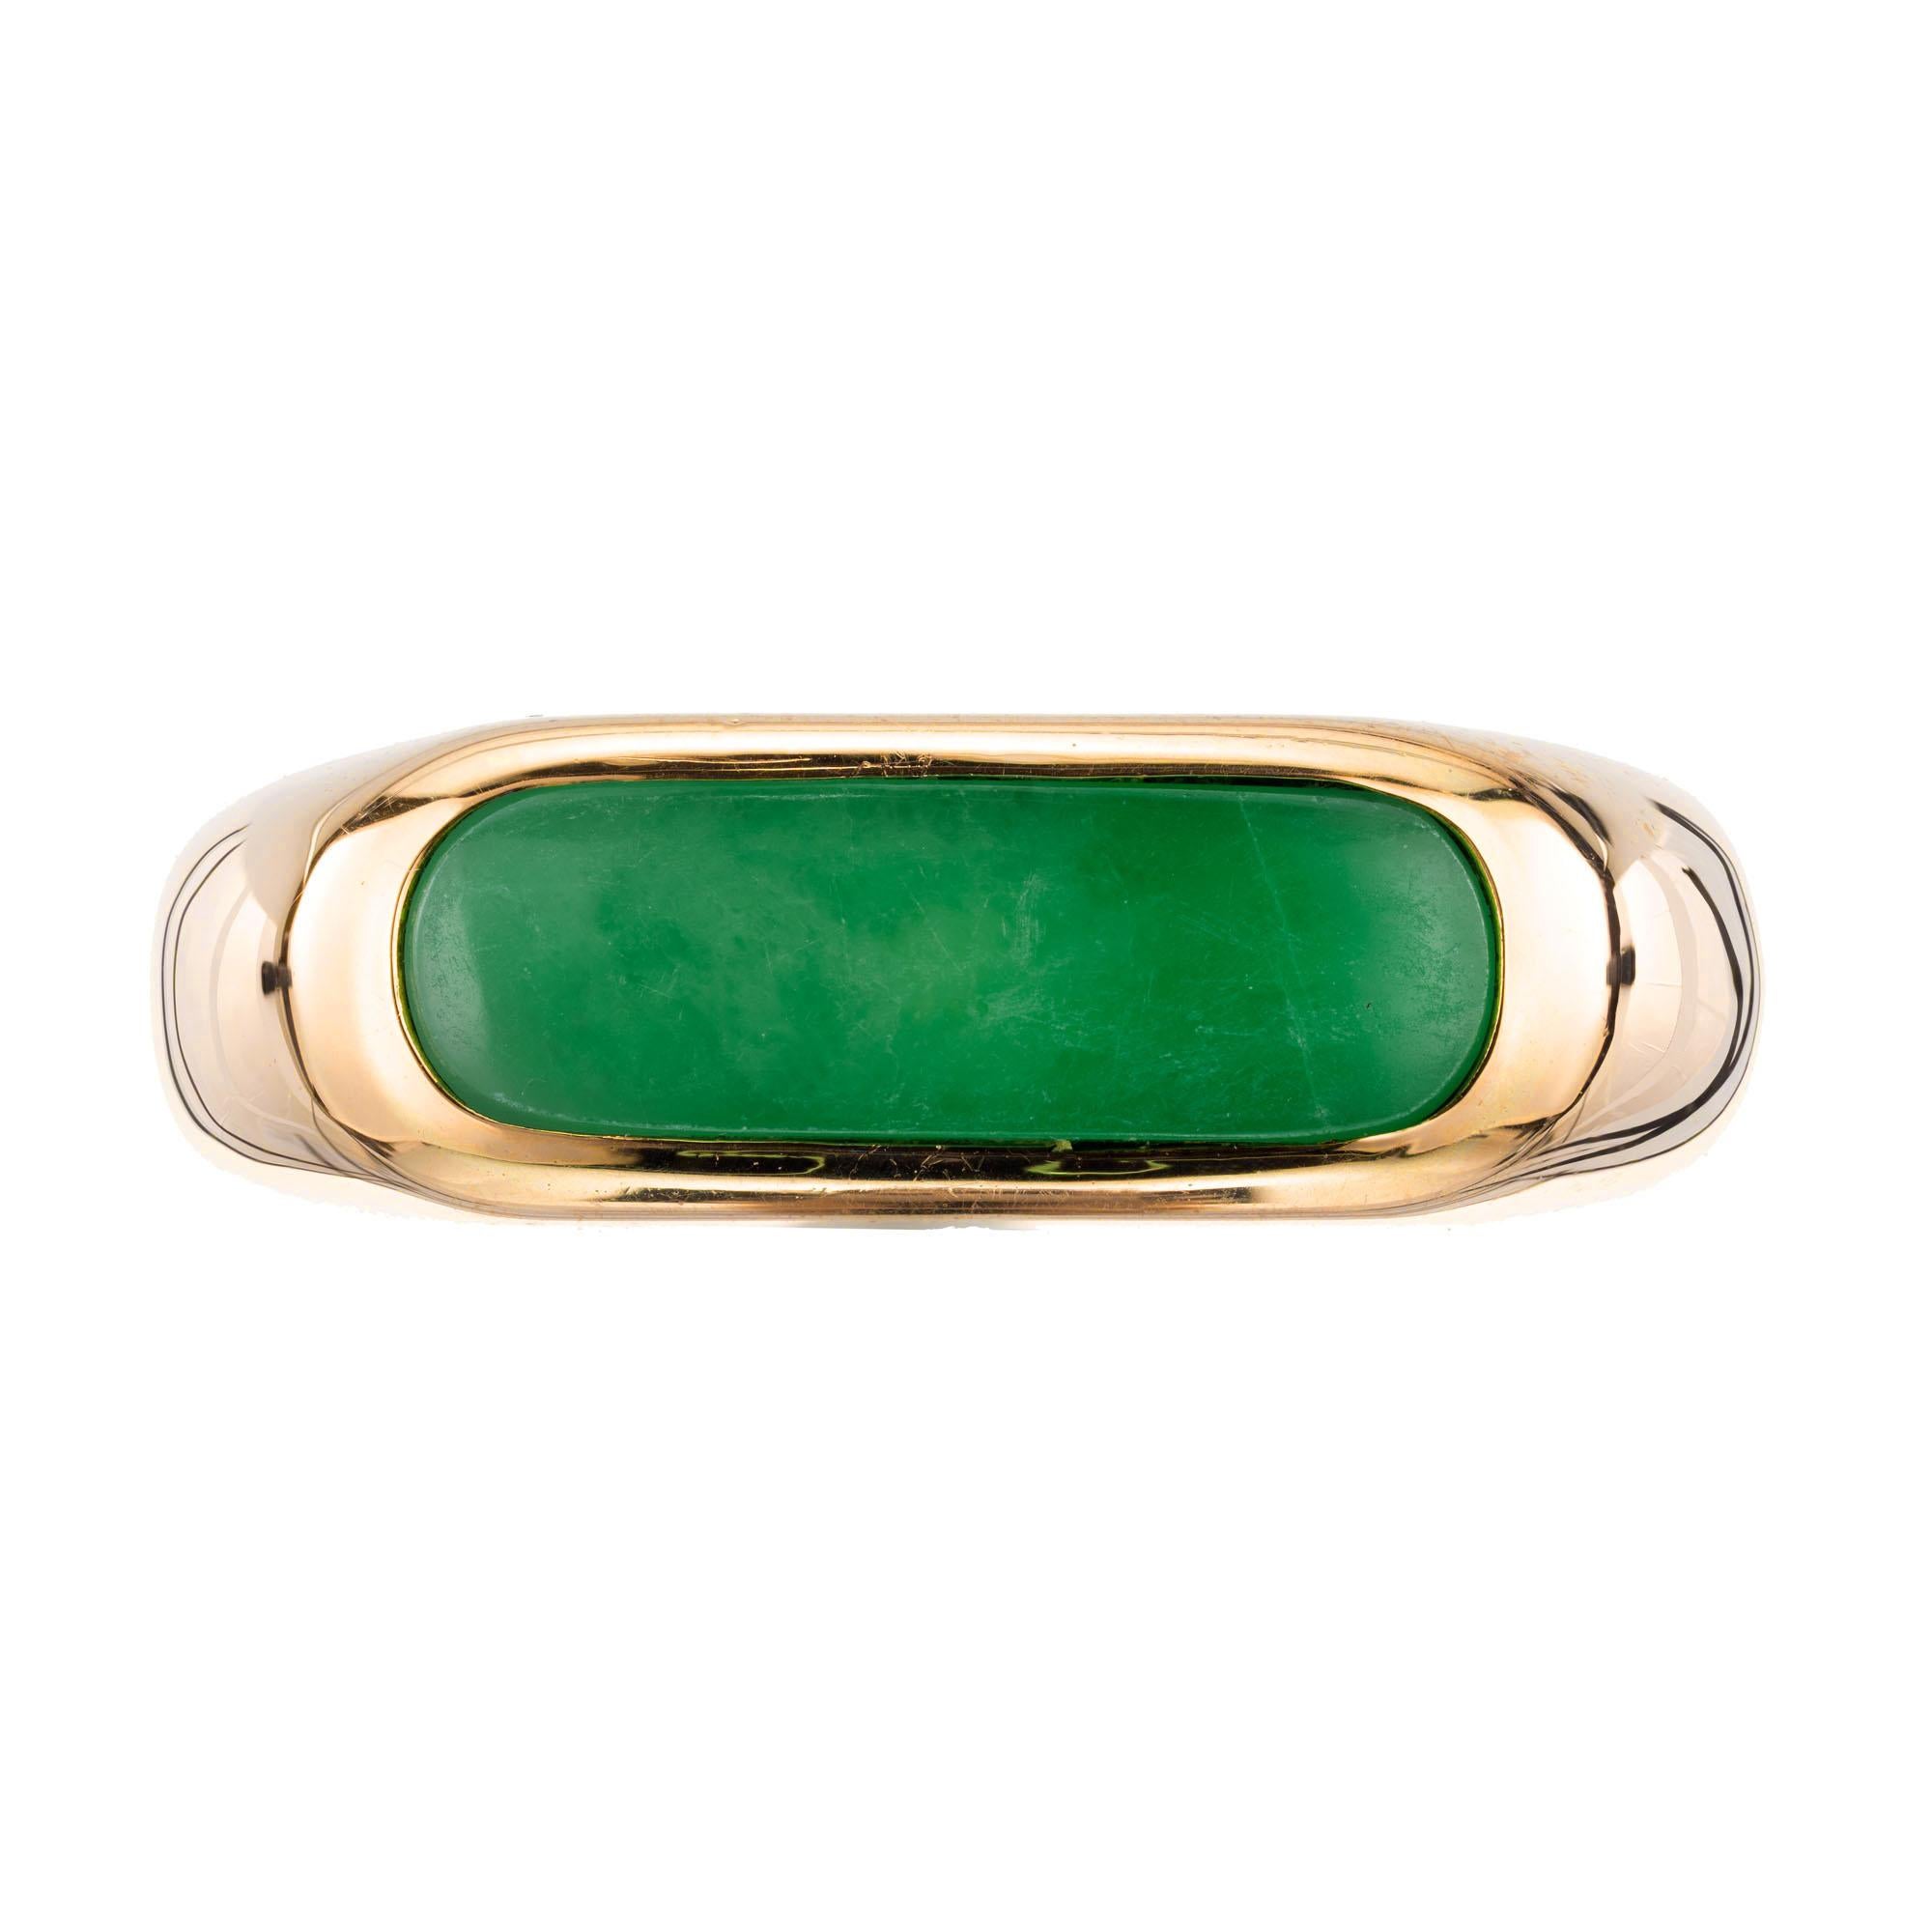 GIA certified natural color Jadeite Jade saddle ring, set in 14k yellow gold setting.  

1 oblong oval green cabochon jadeite jade GIA Certificate # 2205197695
Size 8.25 and sizable 
14k yellow gold 
Stamped: 14k
4.9 grams
Width at top: 6.8mm
Height